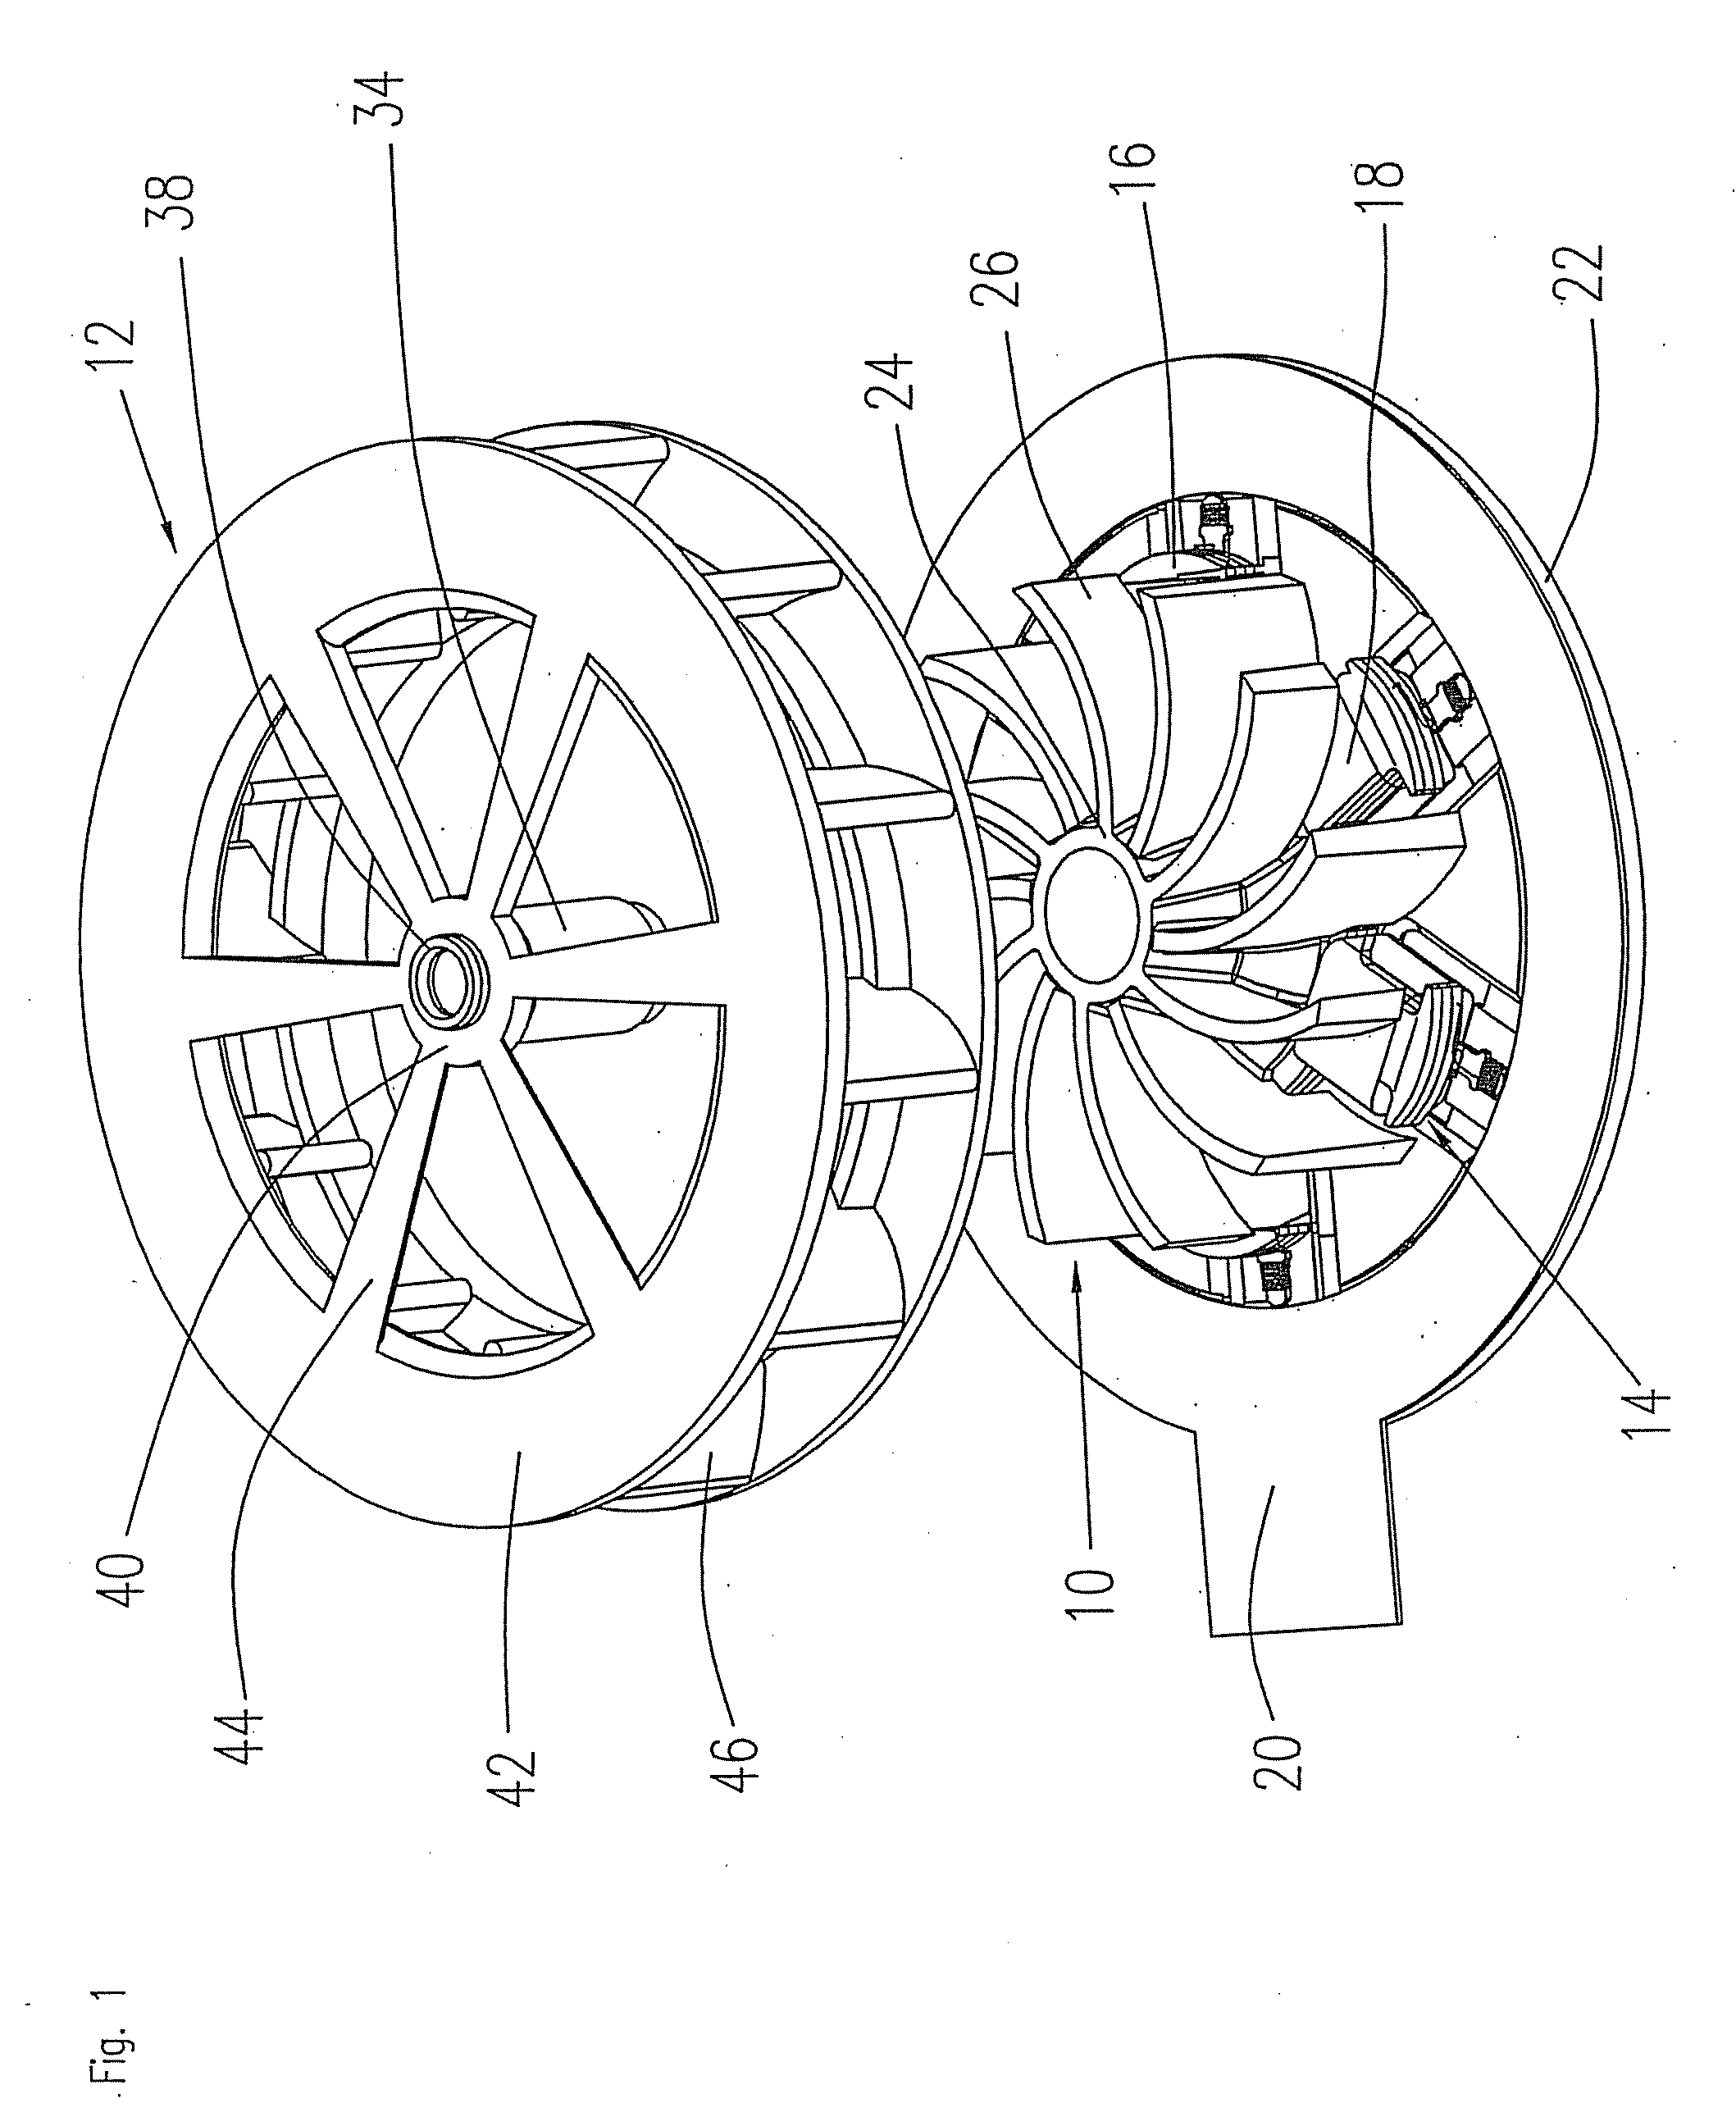 Cooling apparatus for an electronic device to be cooled